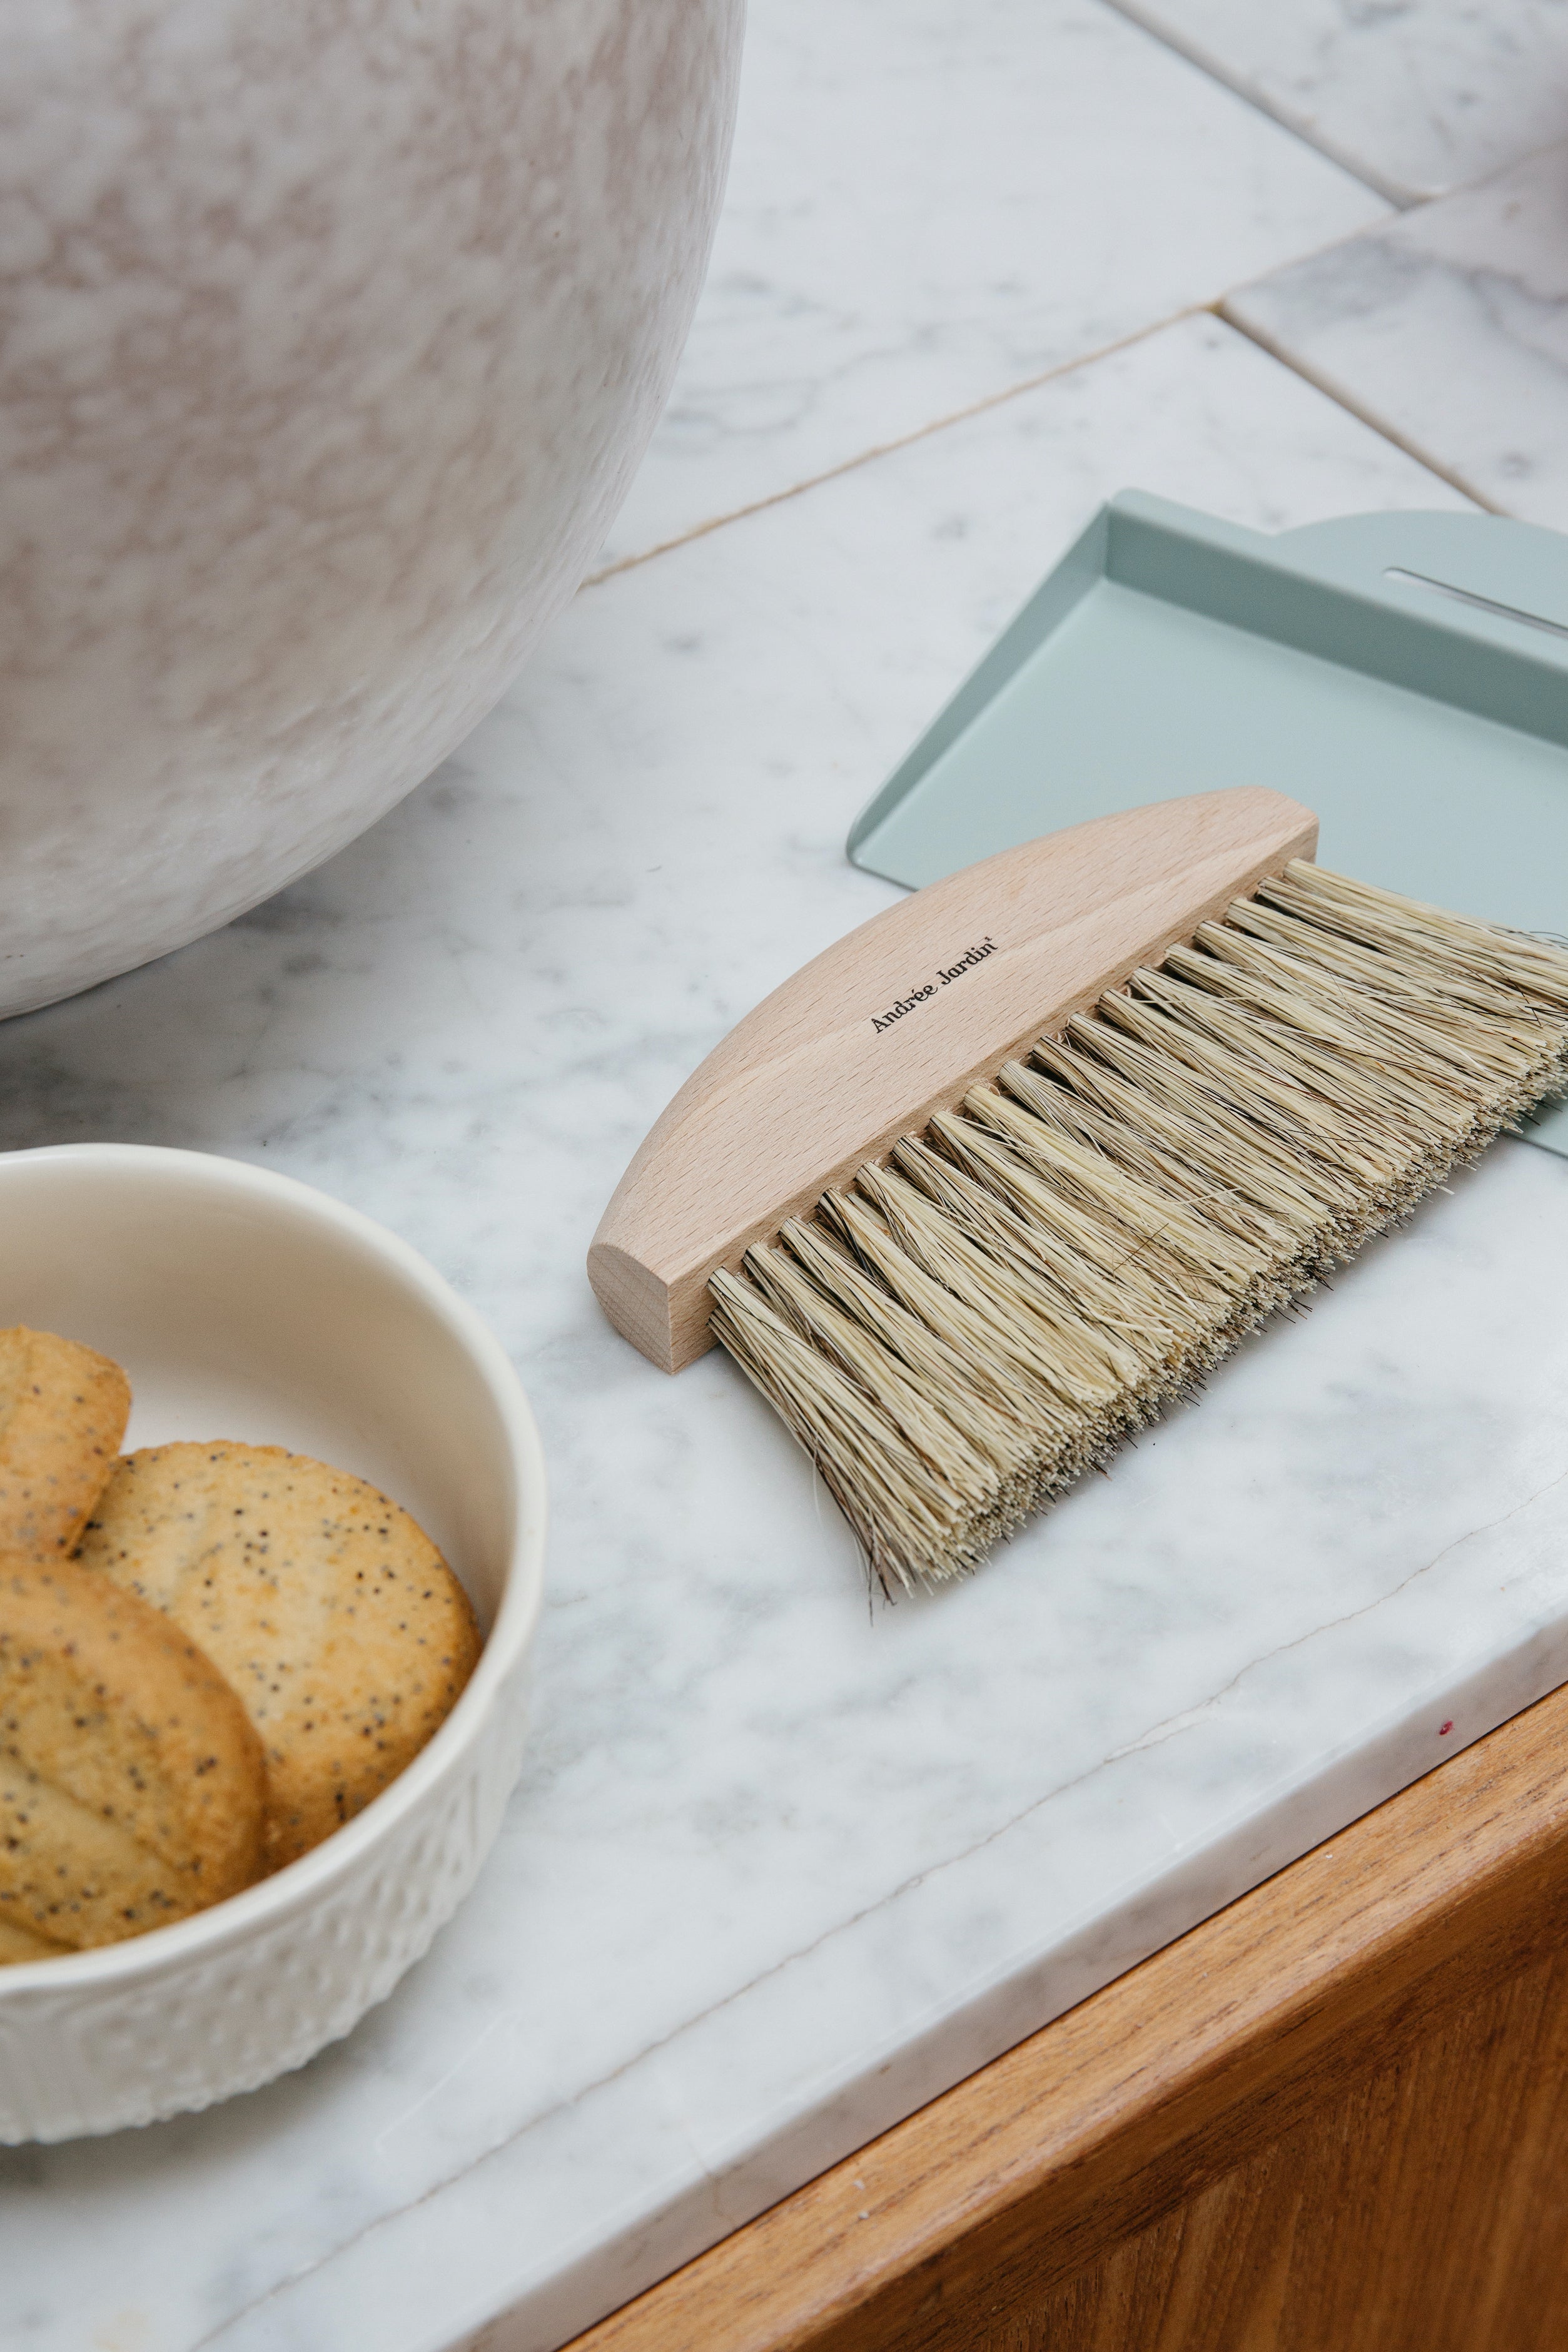 Andrée Jardin Mr. and Mrs. Clynk Natural Table Brush and Dustpan Set Utilities Andrée Jardin Back in stock Brand_Andrée Jardin Home_Broom Sets Home_Household Cleaning New Arrivals coffret-ramasse-miettes-table-clynk-nature-3166AndreeJardinMr.andMrs.ClynkNaturalTableBrushandGreyGreenDustpanSet_adfa001e-0ff9-41df-959e-9cc027538274